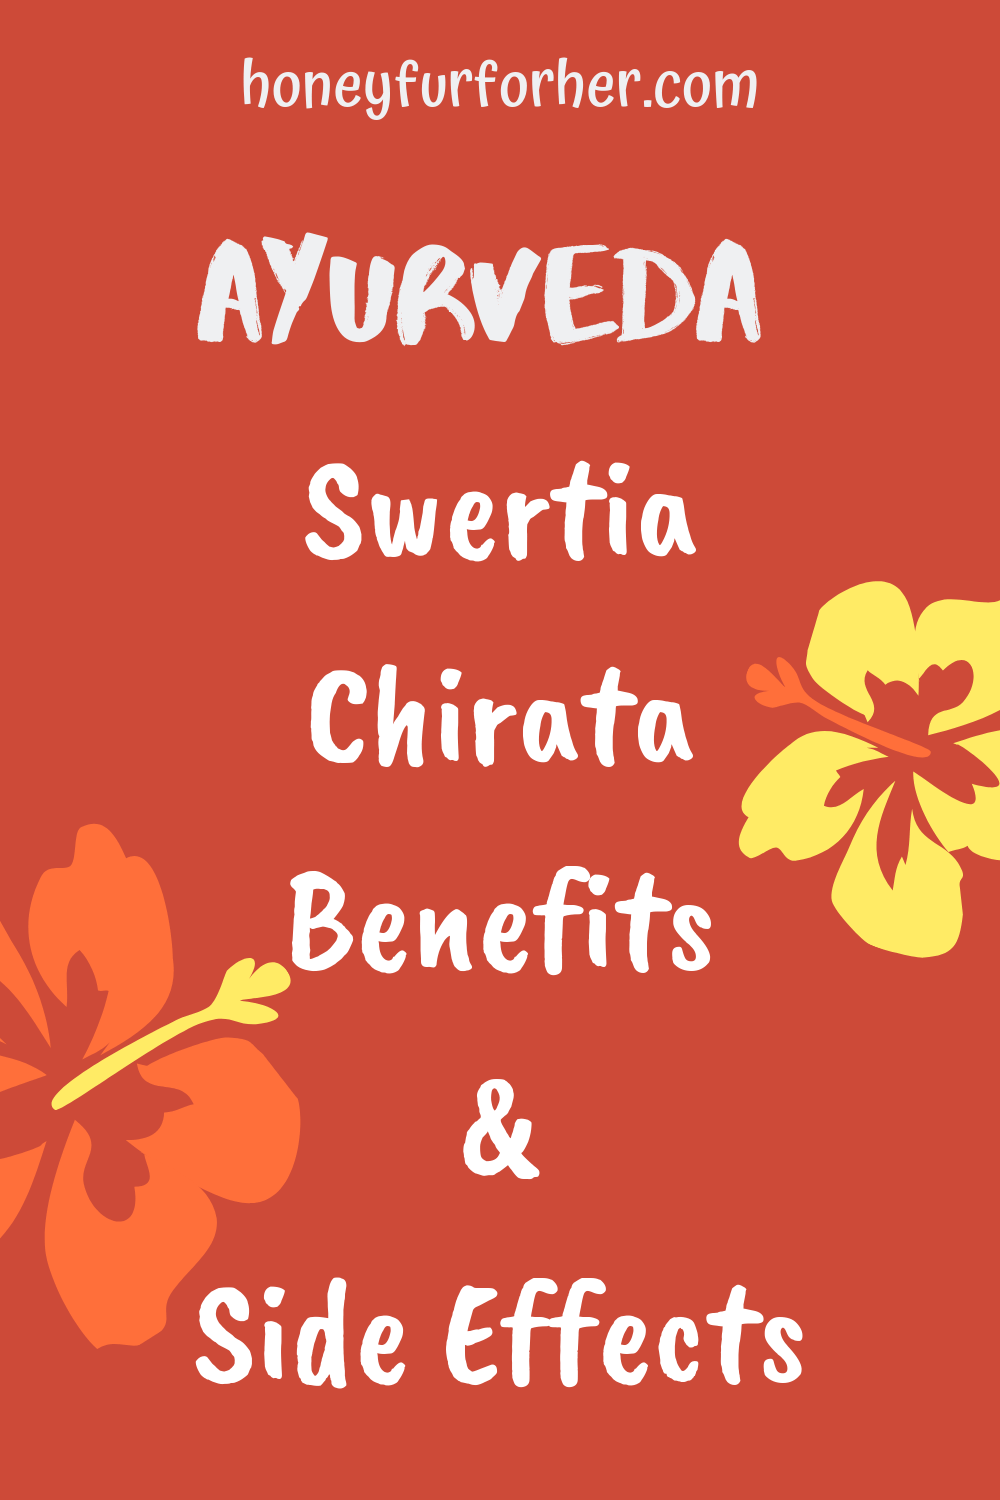 Swertia Chirata Benefits And Side Effects Pinterent Pin Graphic